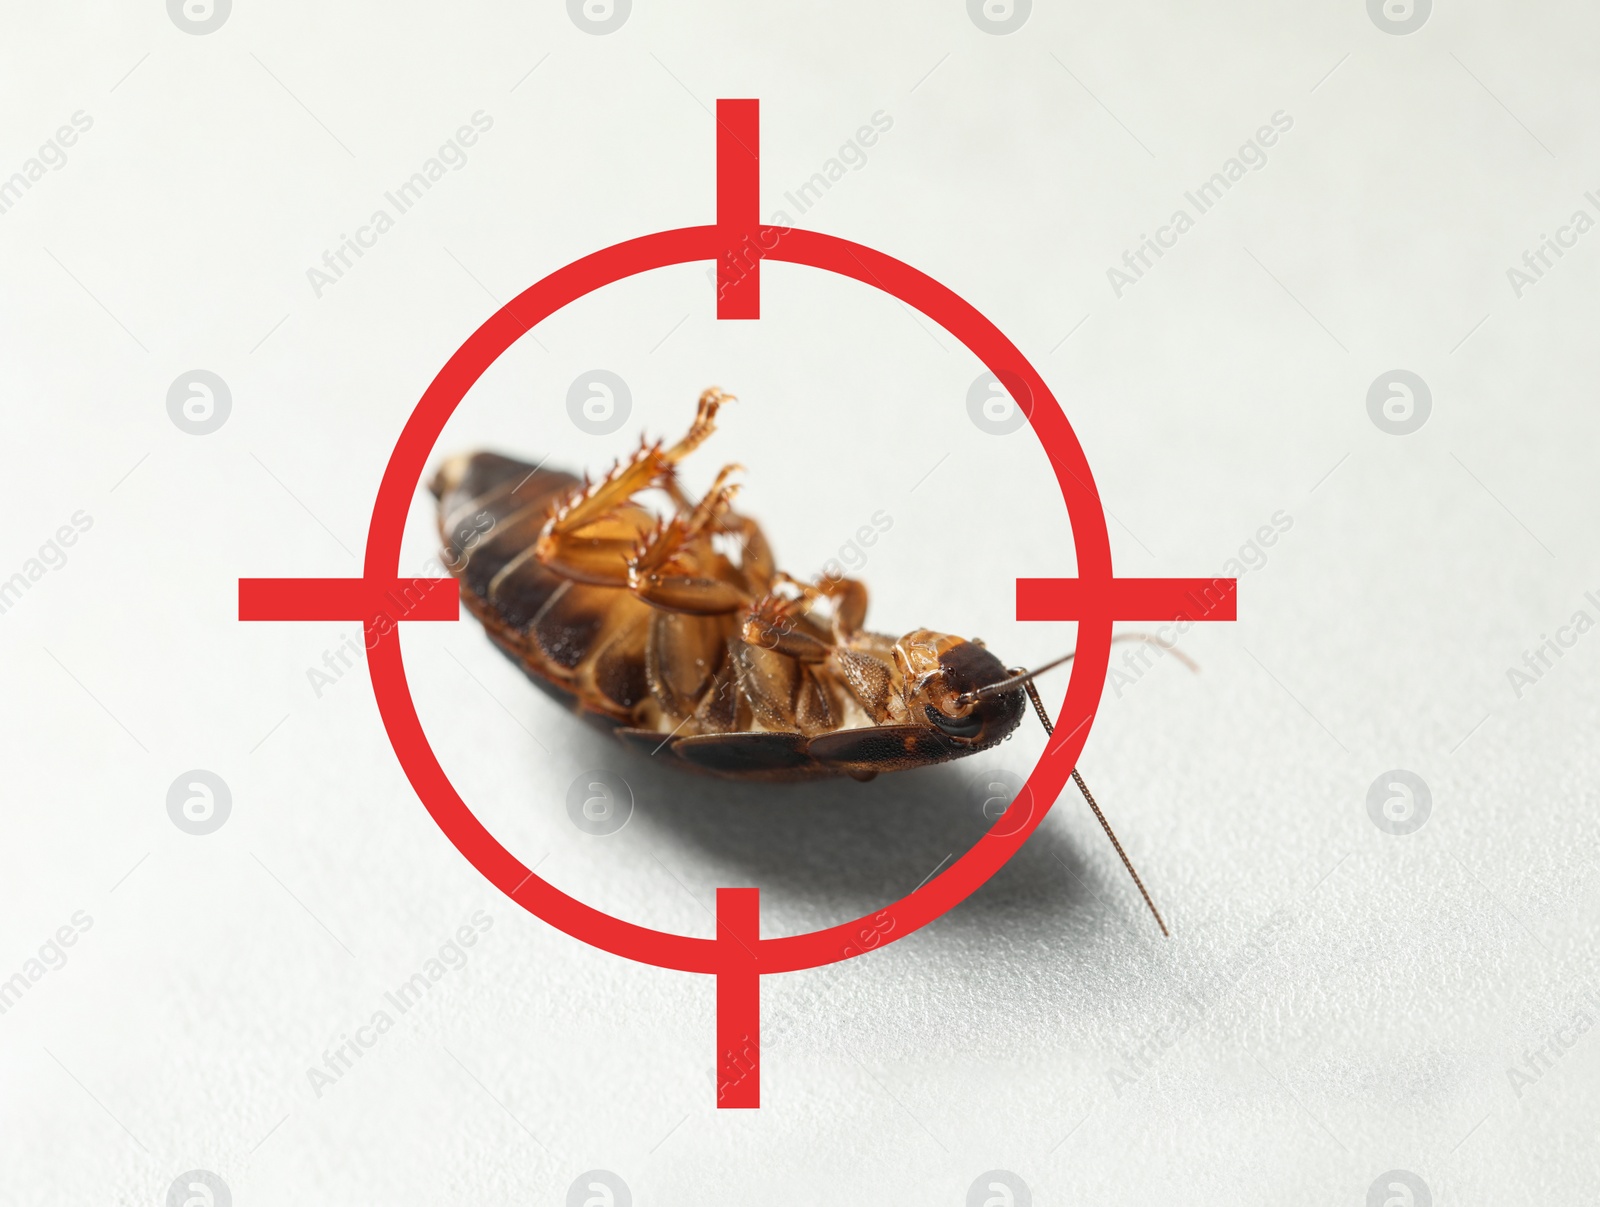 Image of Dead cockroach with red target symbol on light surface. Pest control